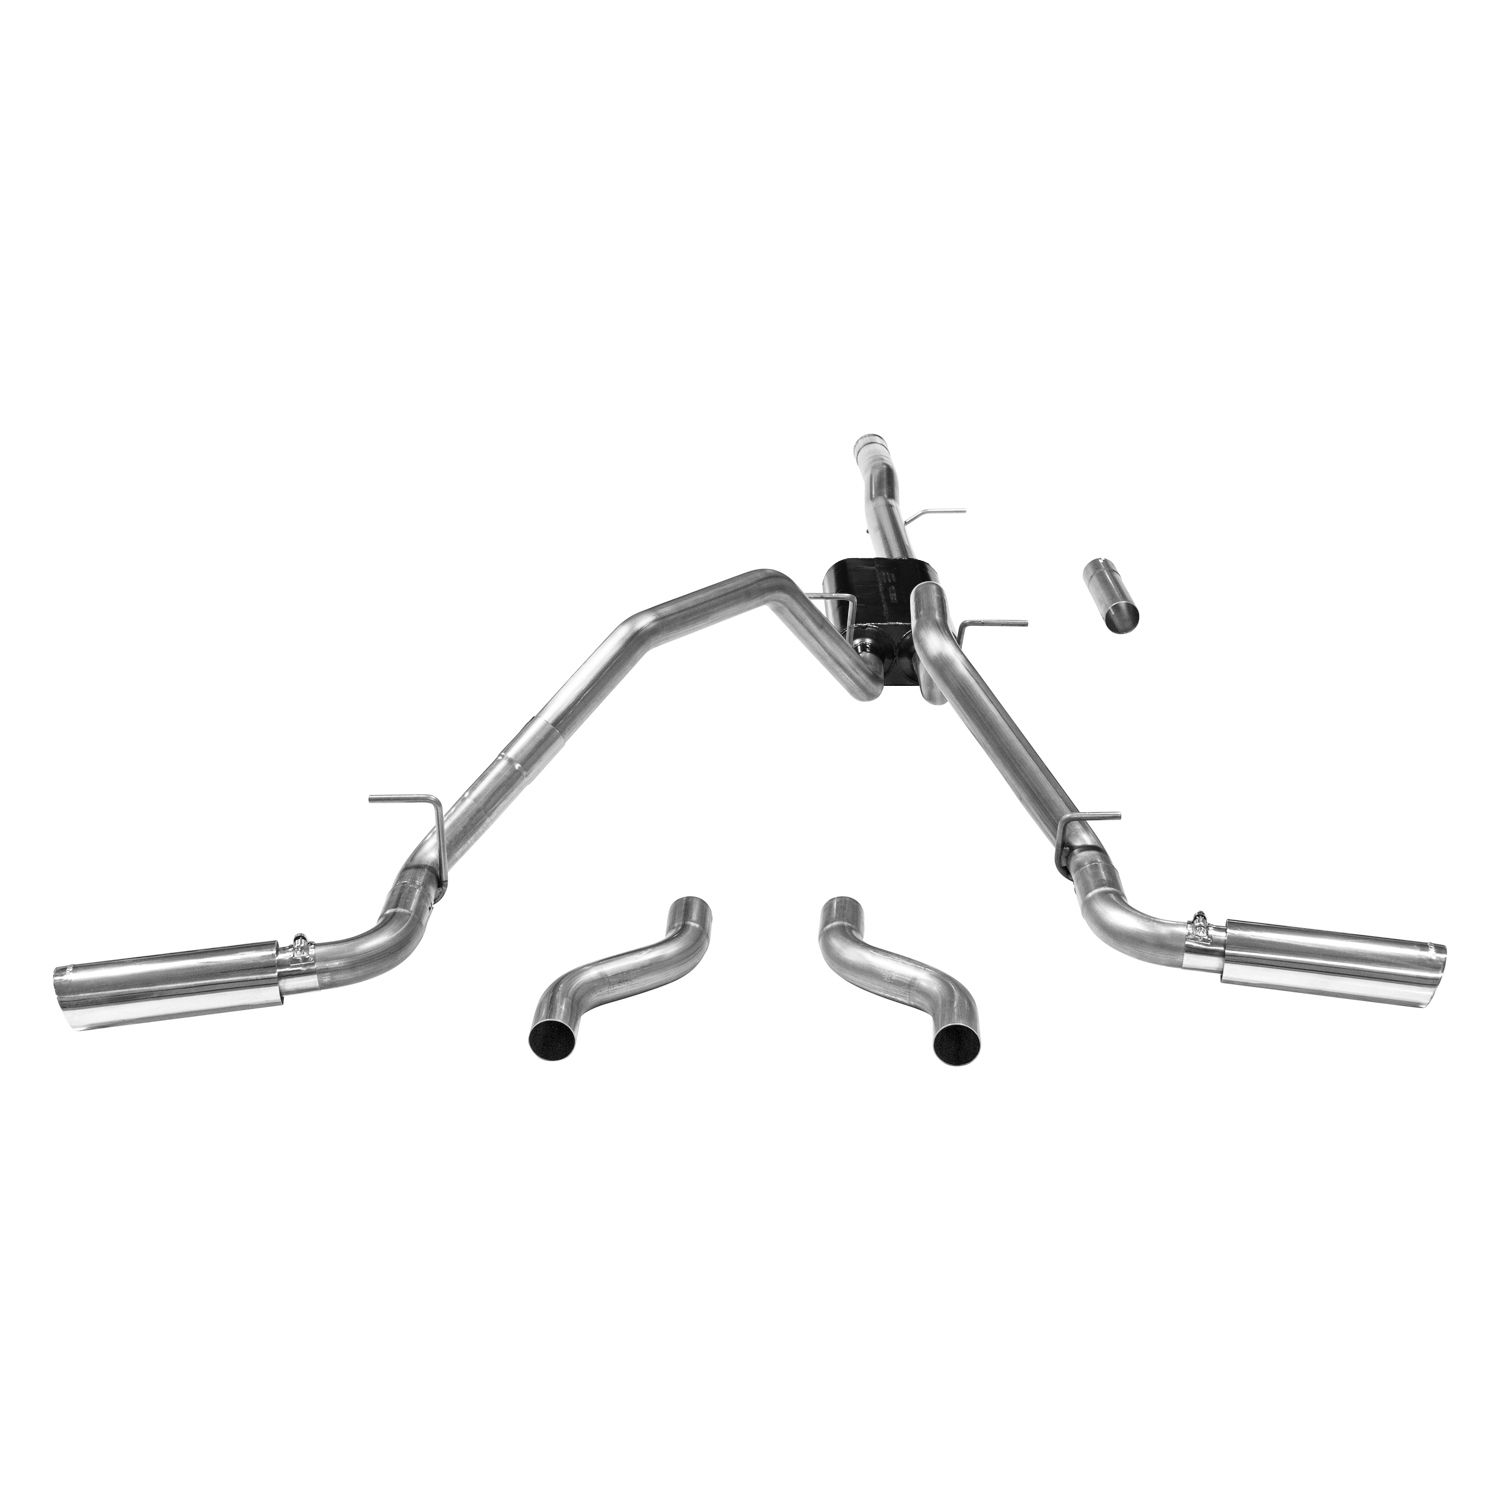 2011-2013 Chevrolet Silverado 1500 LT 6.2L Crew Cab/EXT Cab Flowmaster American Thunder Cat-Back Exhaust 69.3 inch Bed - 817602